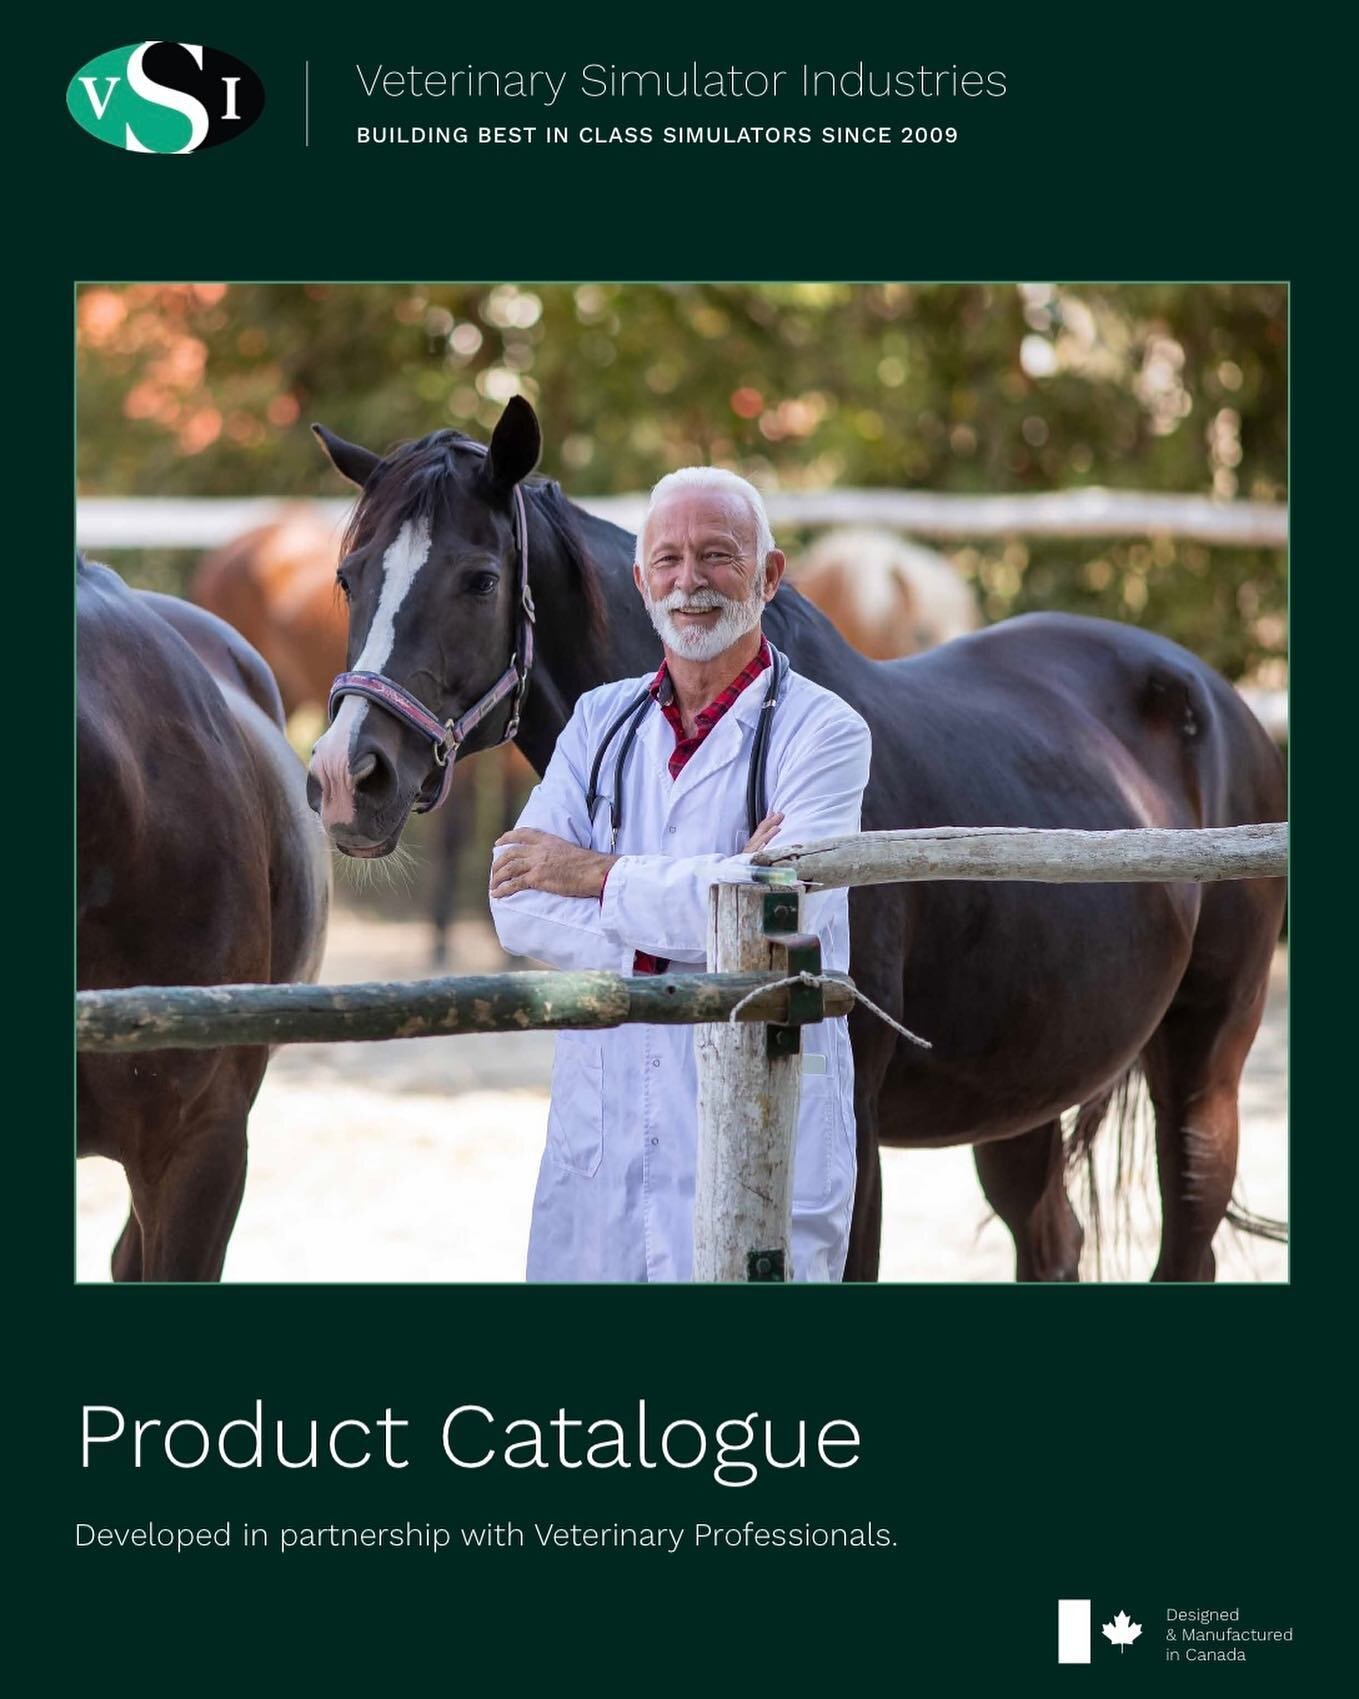 Check out our latest product catalogue! Please visit our new website to find out more about us. Link in Bio.